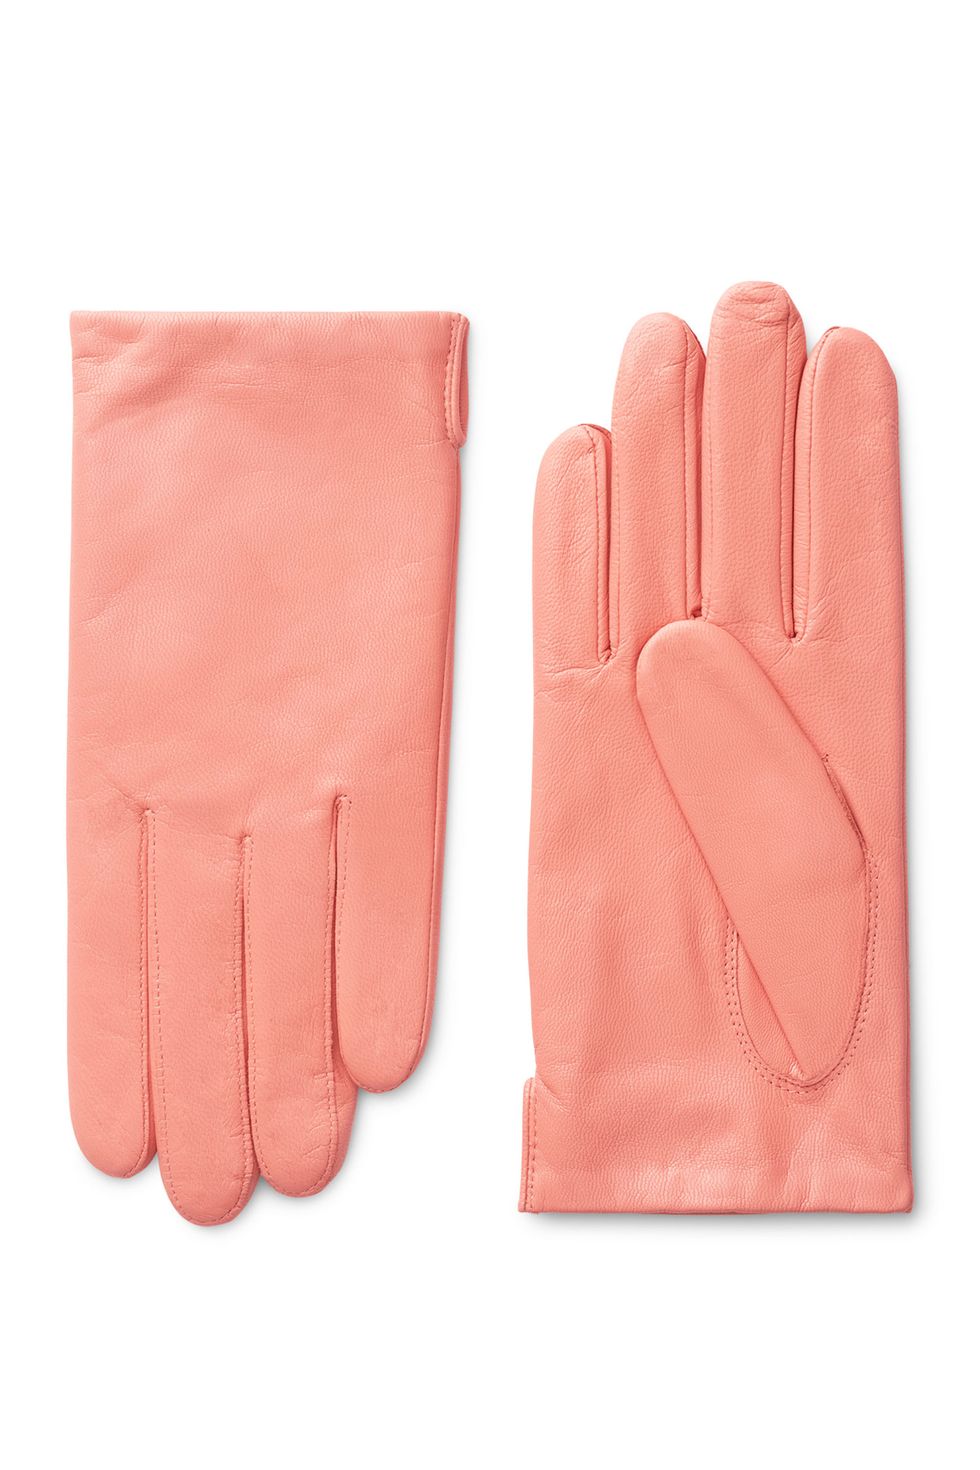 Glove, Safety glove, Pink, Personal protective equipment, Hand, Finger, Fashion accessory, Leather, Sports gear, 